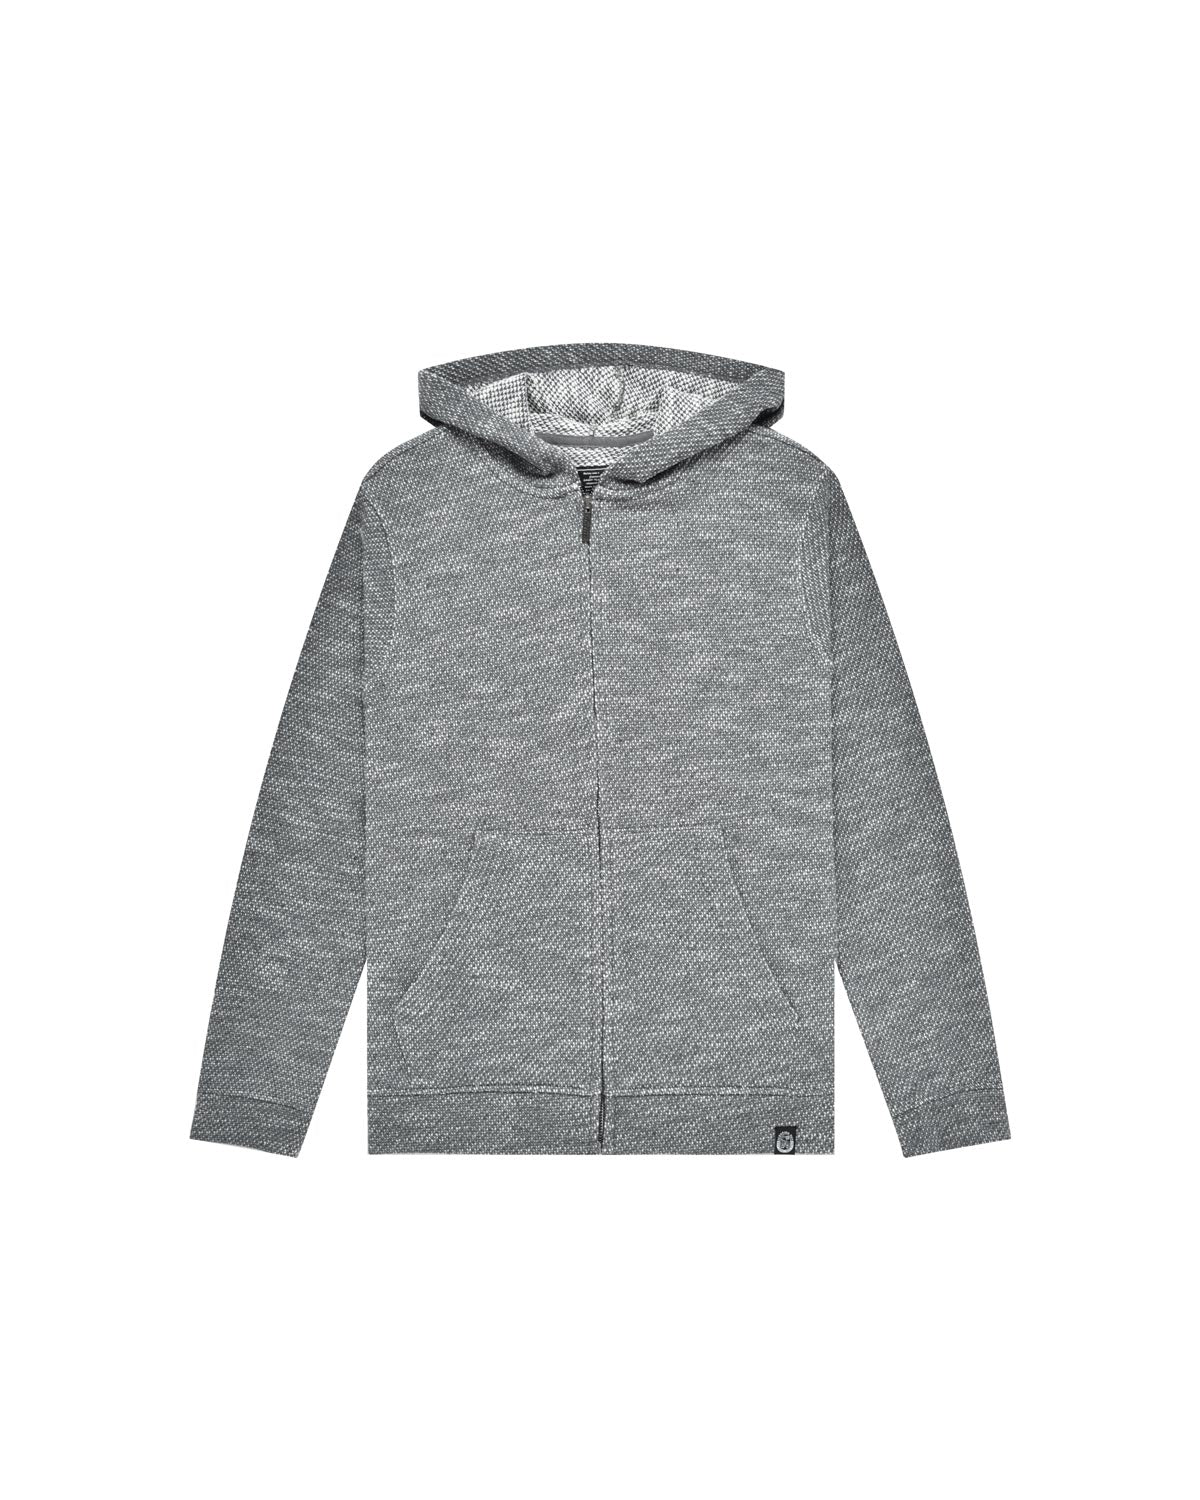 Man | Anthracite-coloured knitted pullover with hood and zip